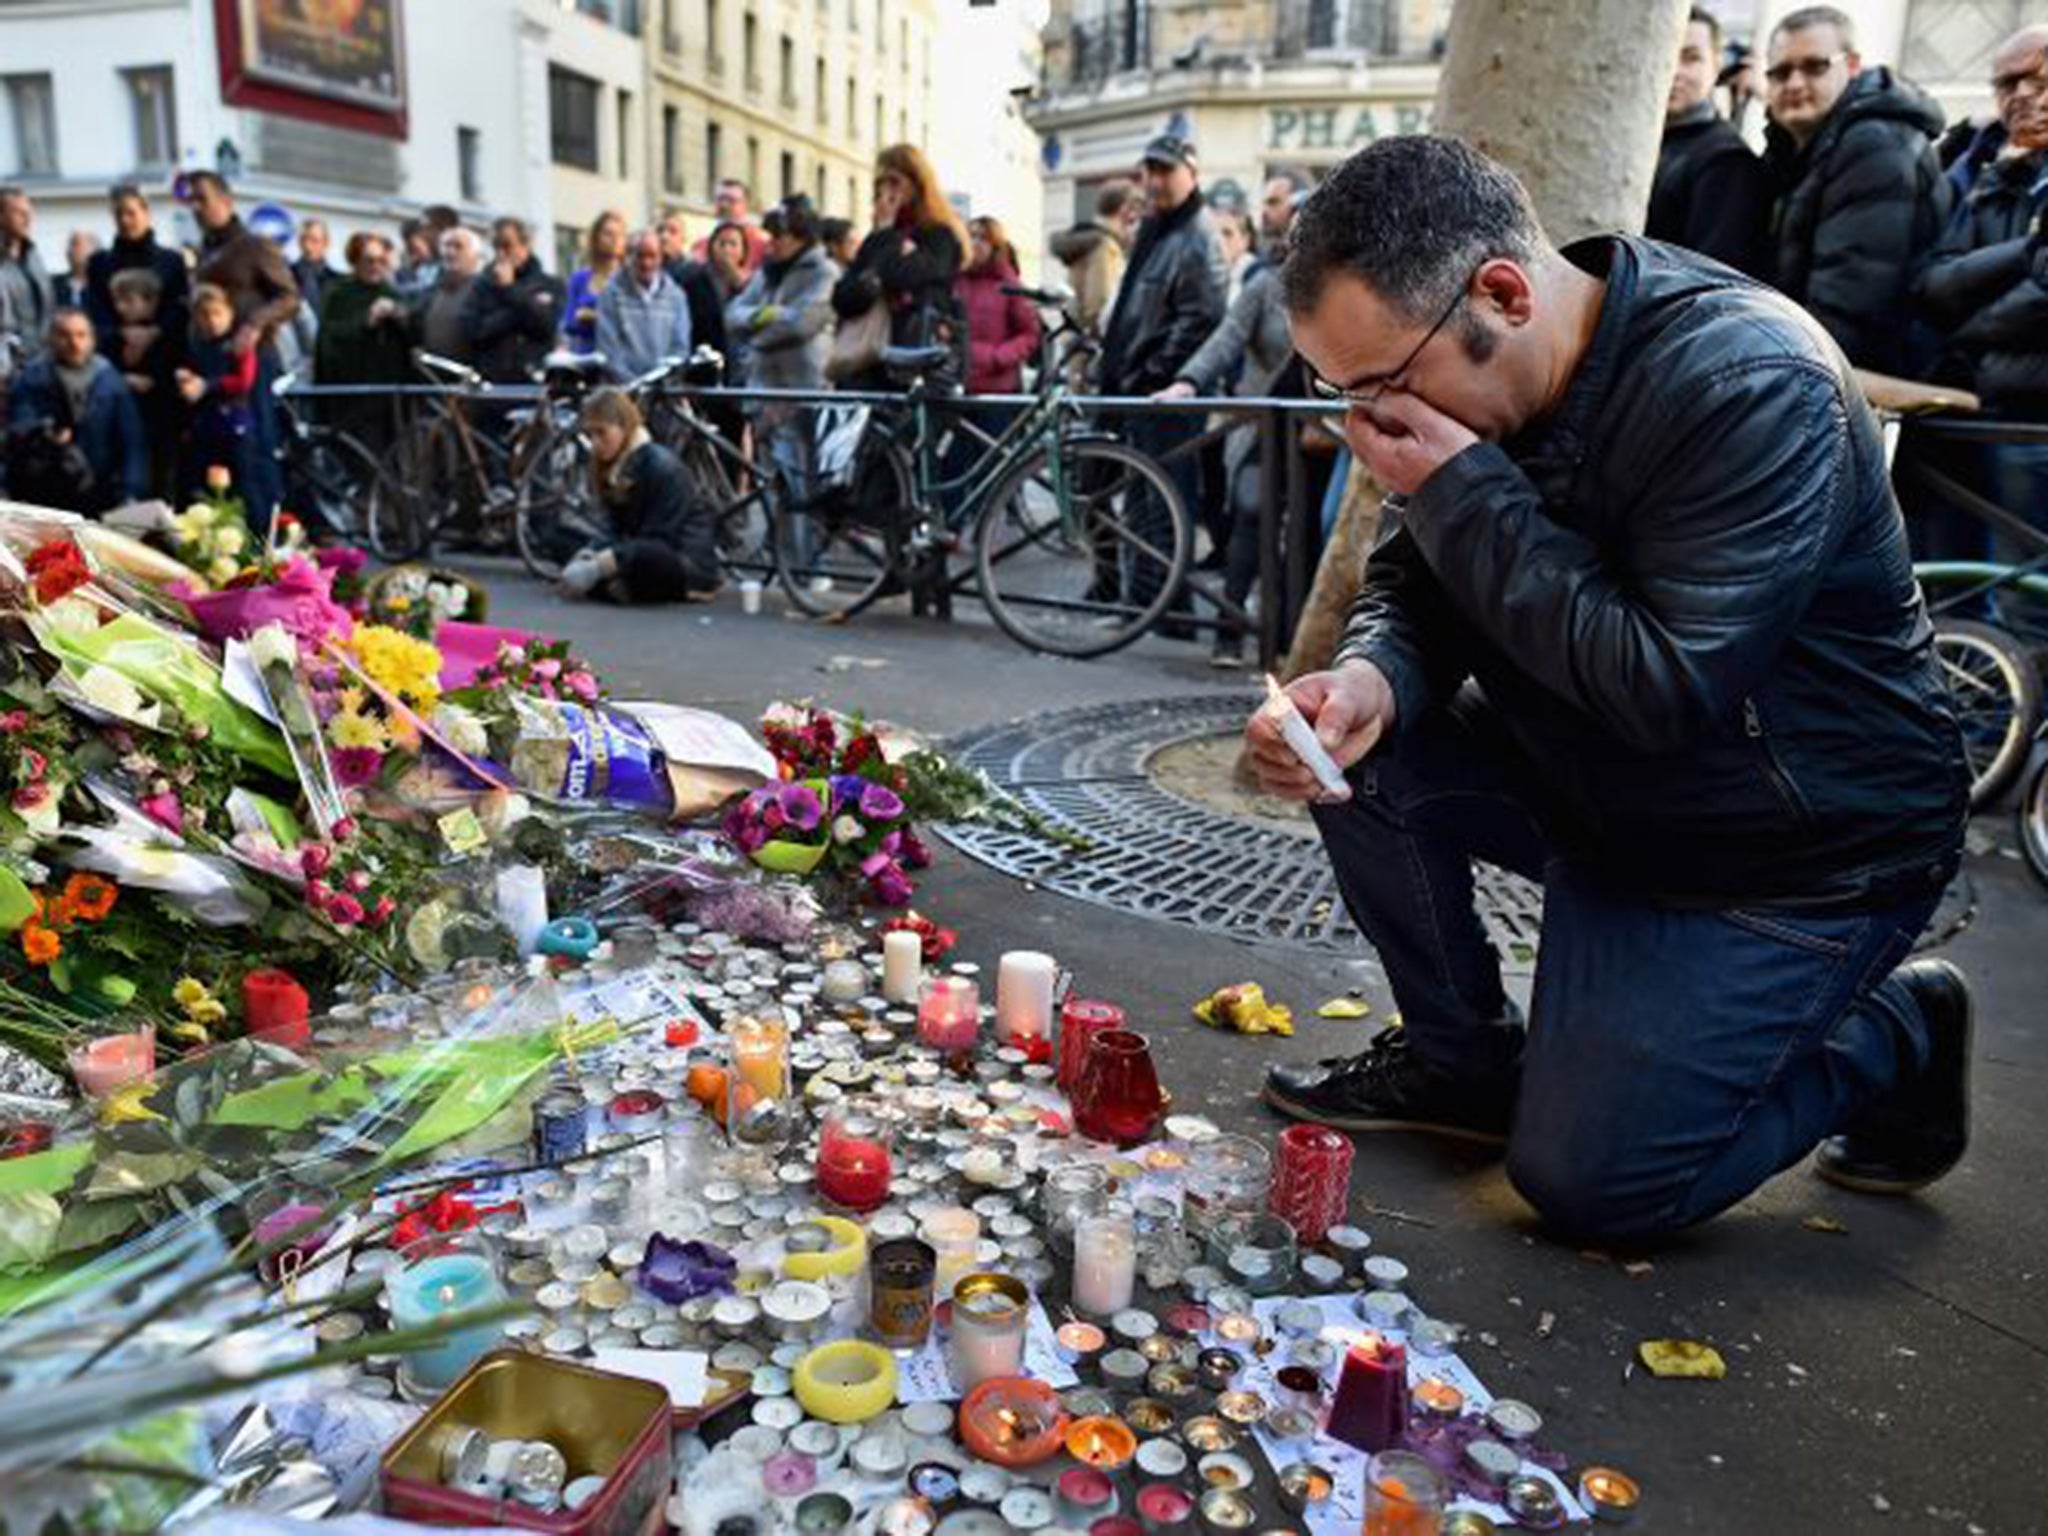 Members of the public gather to lay flowers and light candles at La Belle Equipe restaraunt on Rue de Charonne following Friday's terrorist attack